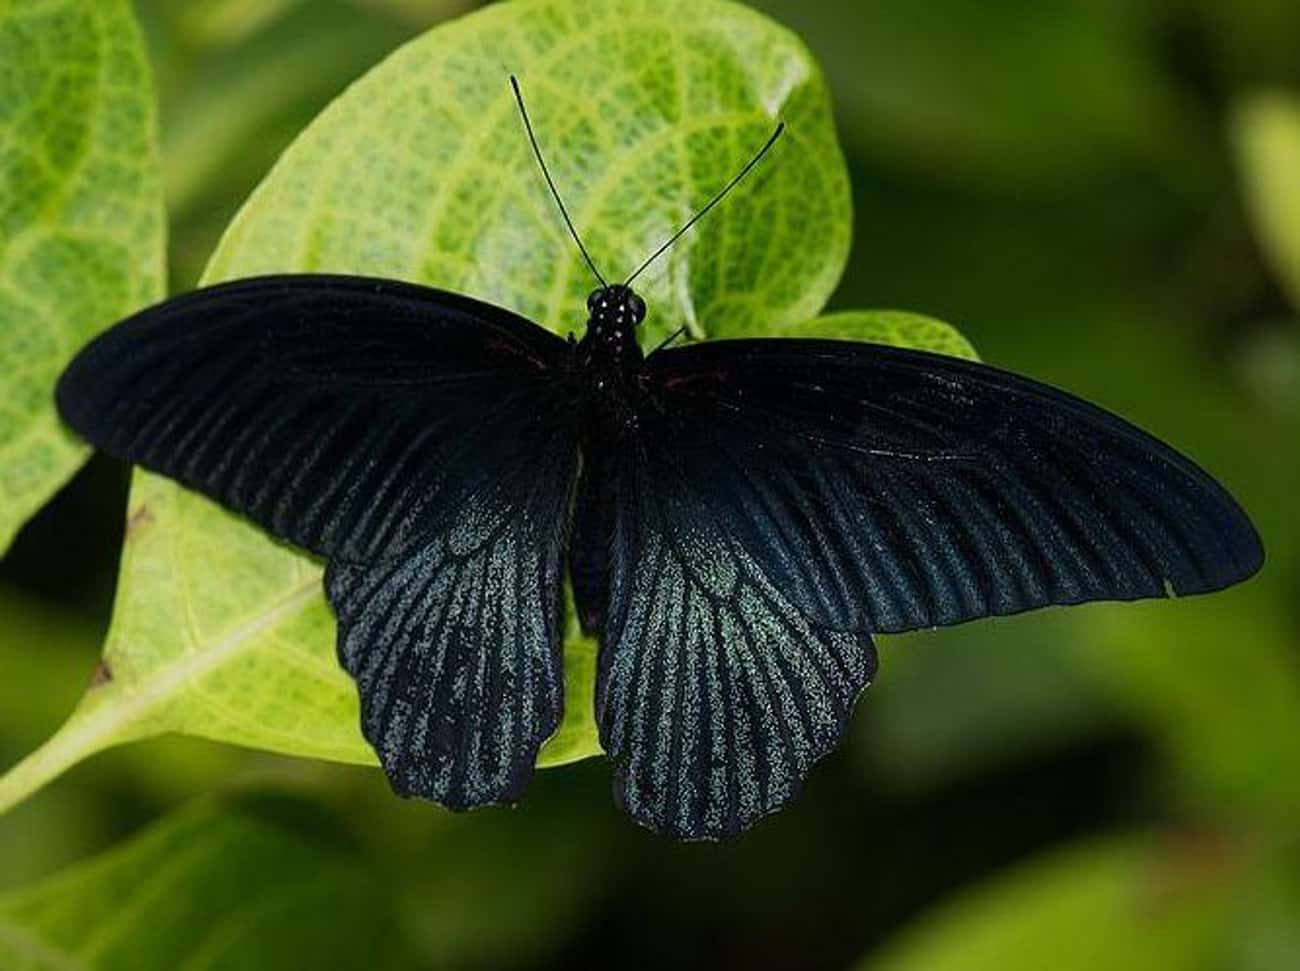 Black Butterflies Are Typically Regarded As A Symbol Of Death